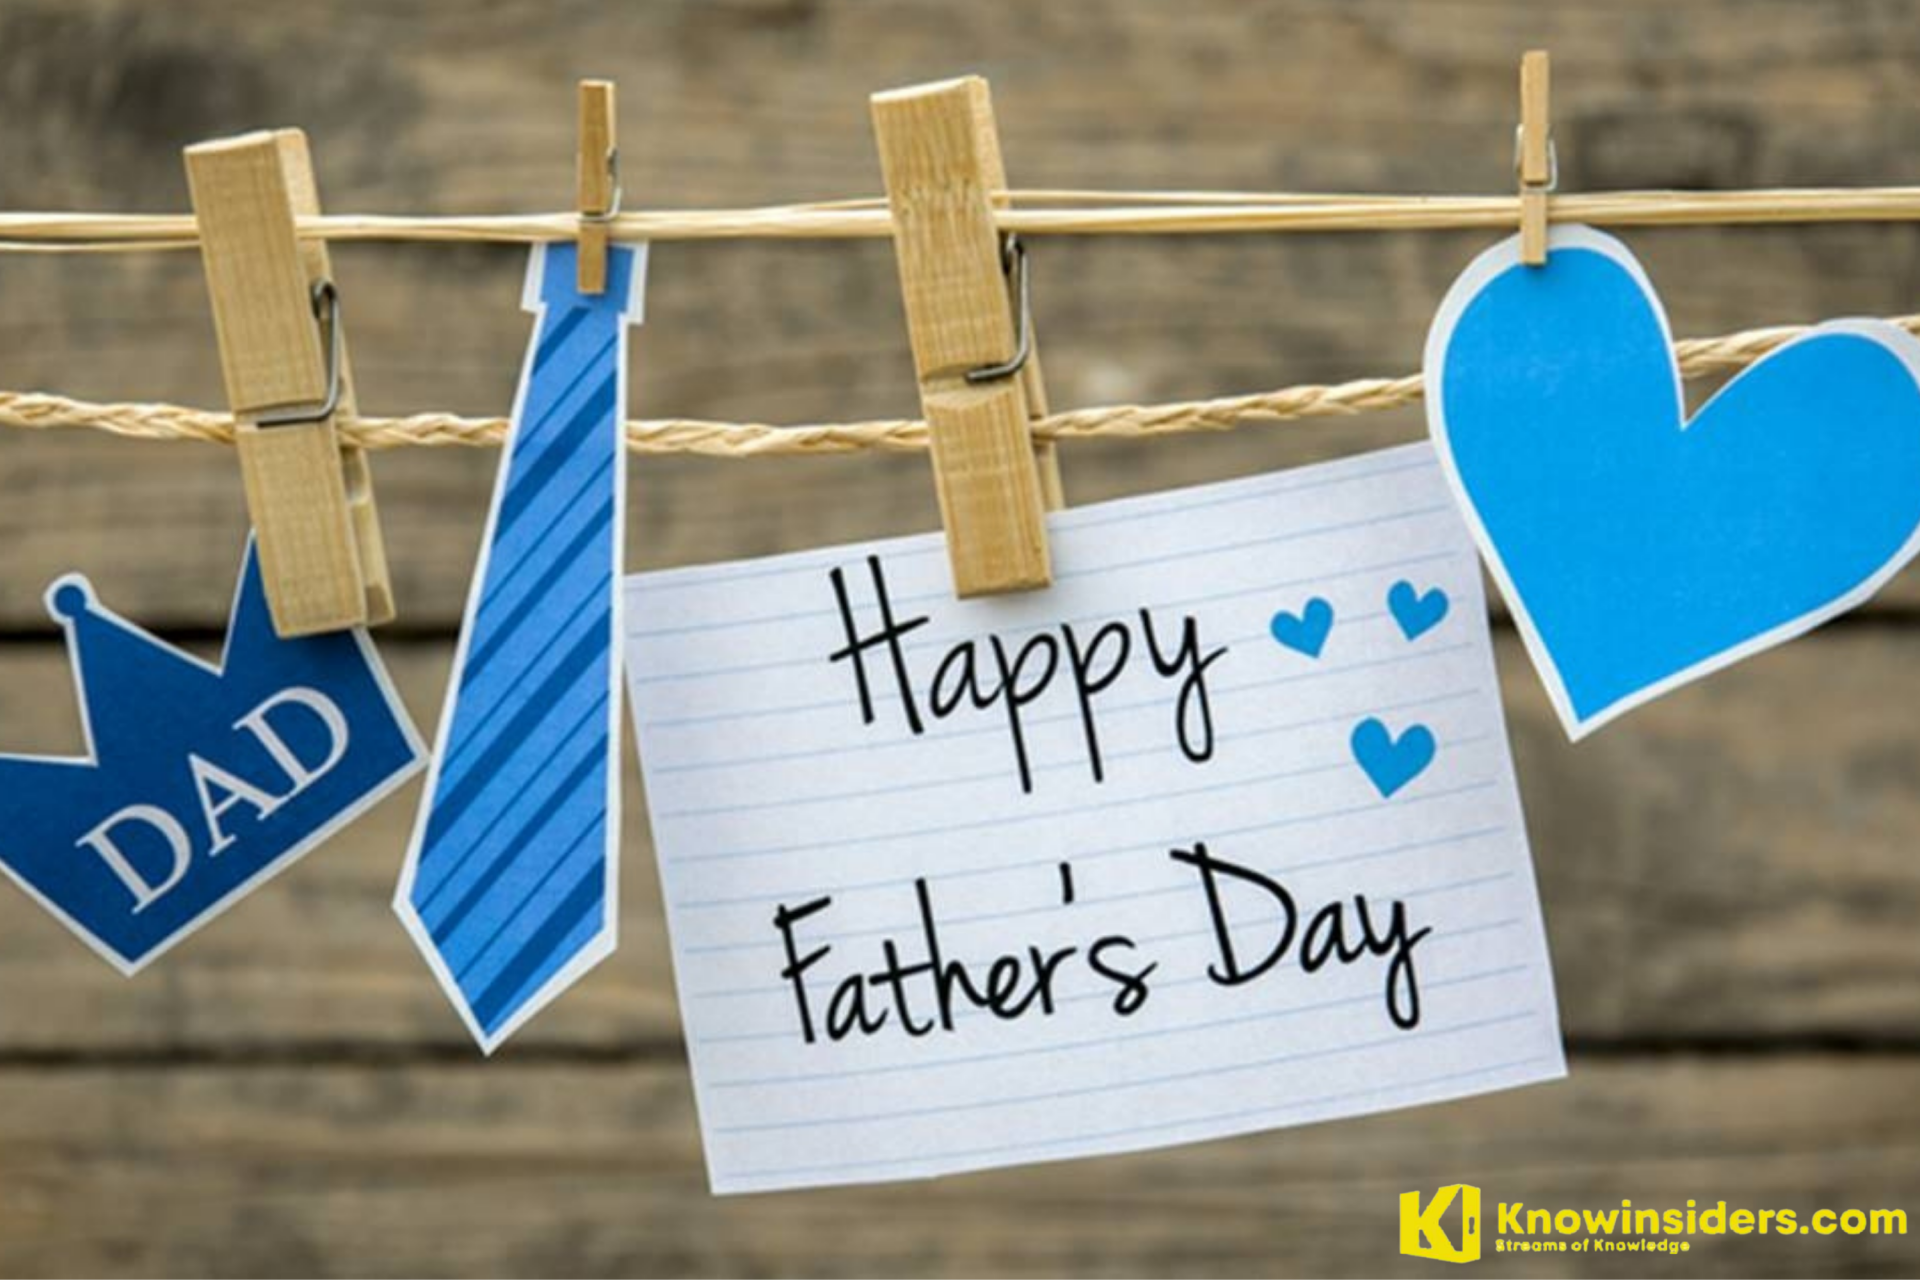 Father's Day: When, History, Meaning, How to Celebrate